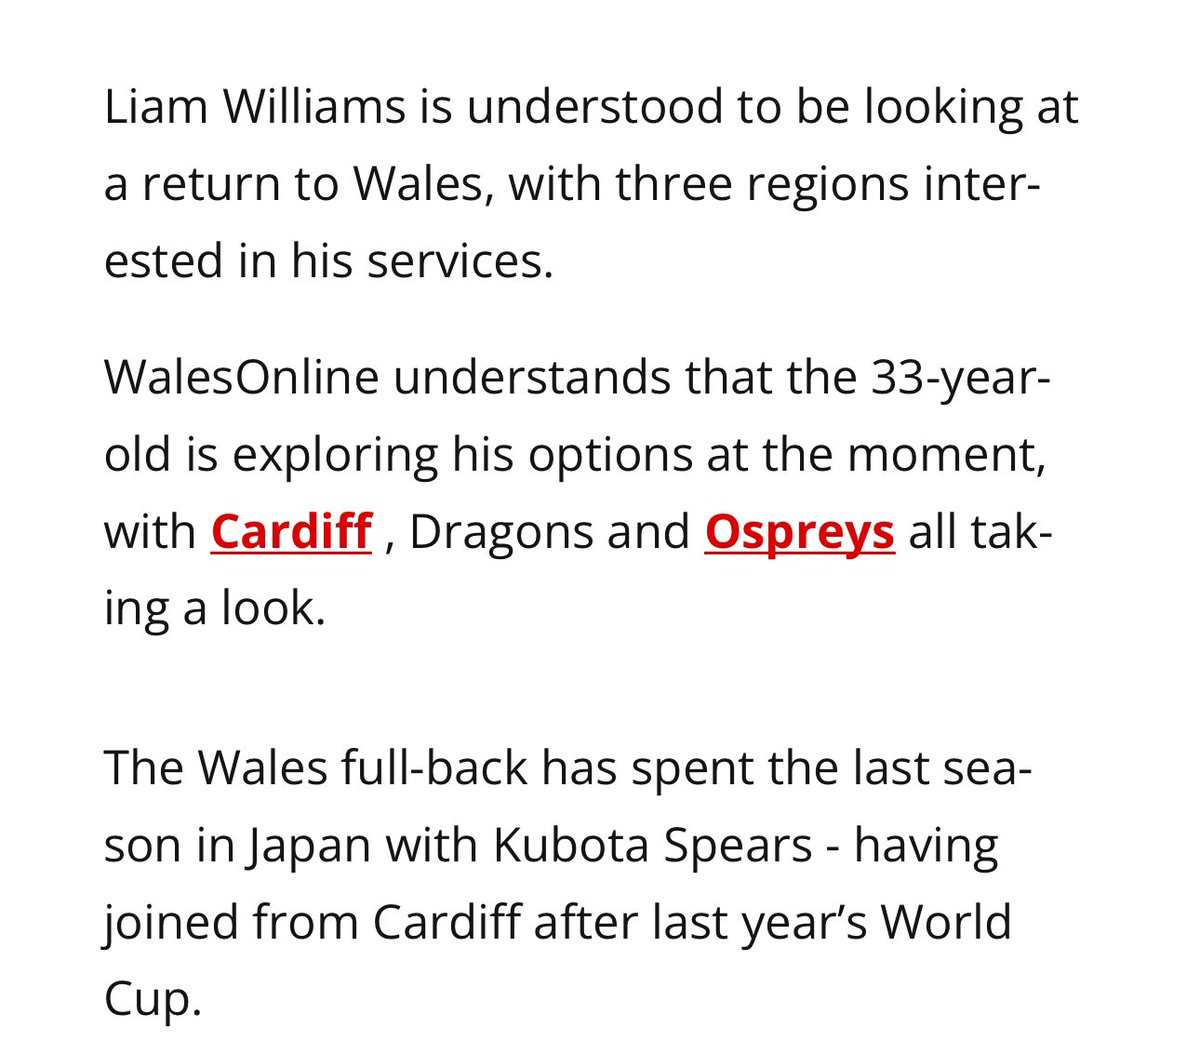 This is interesting.

Liam Williams is looking to return to Wales.

Ospreys, Dragons and Bloos all taking a goosey.